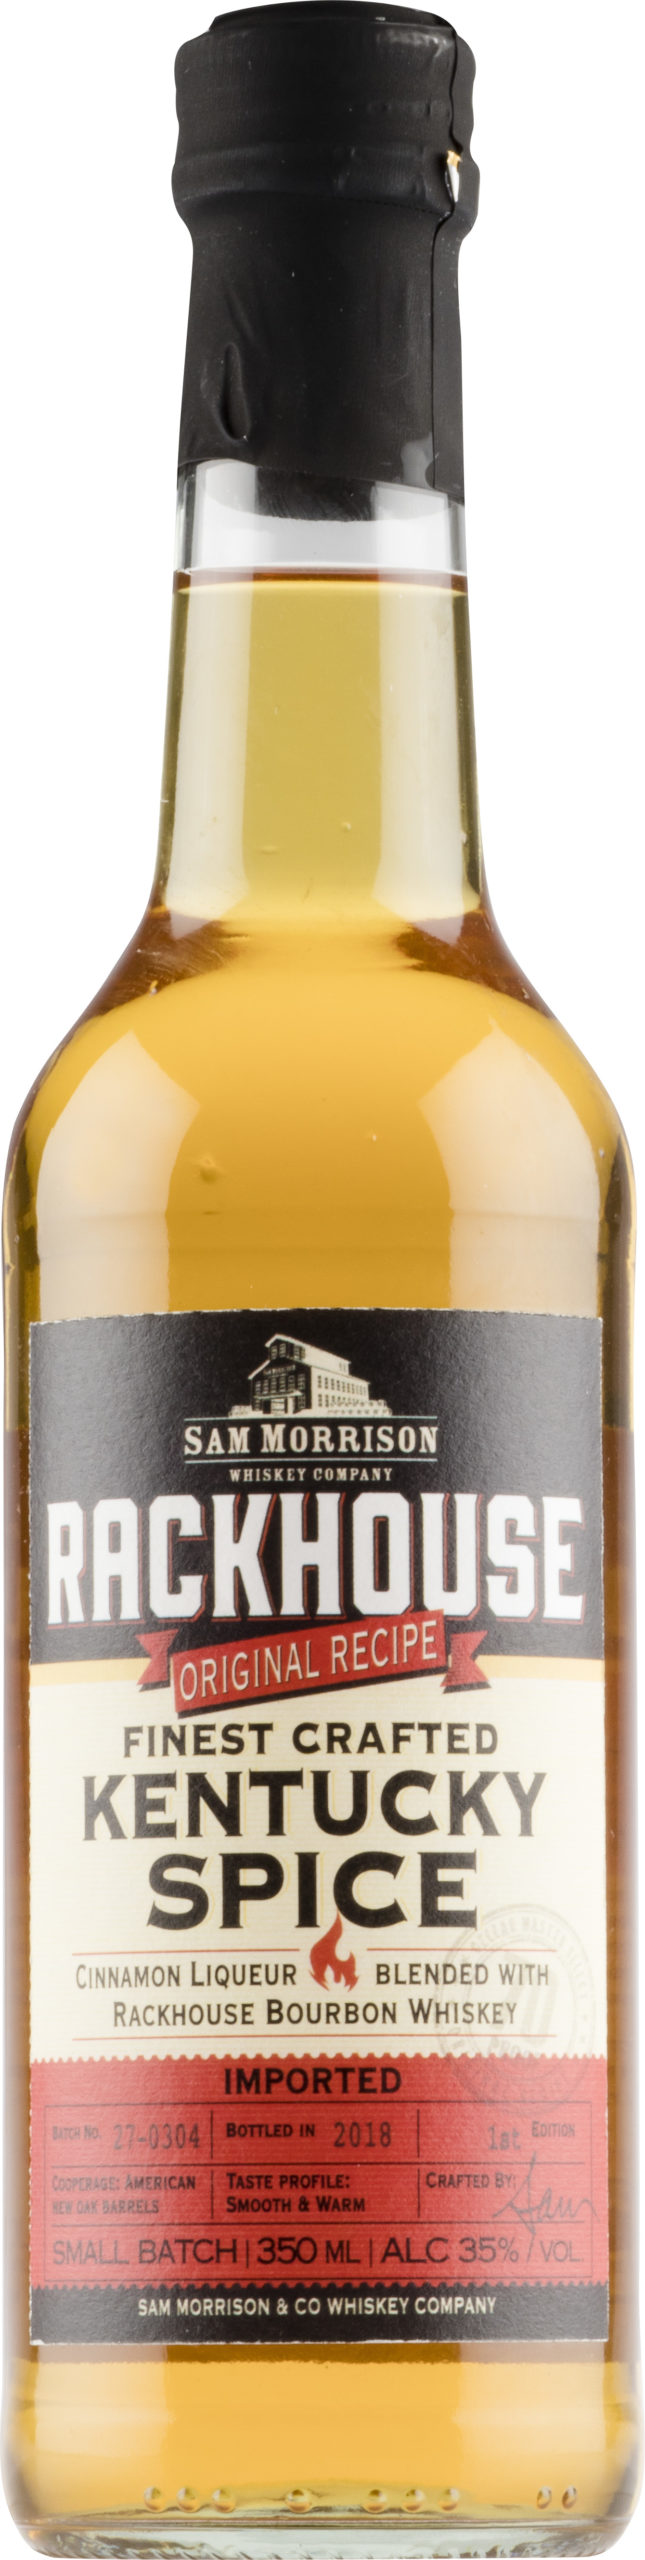 Rackhouse Finest Crafted Kentucky Spice